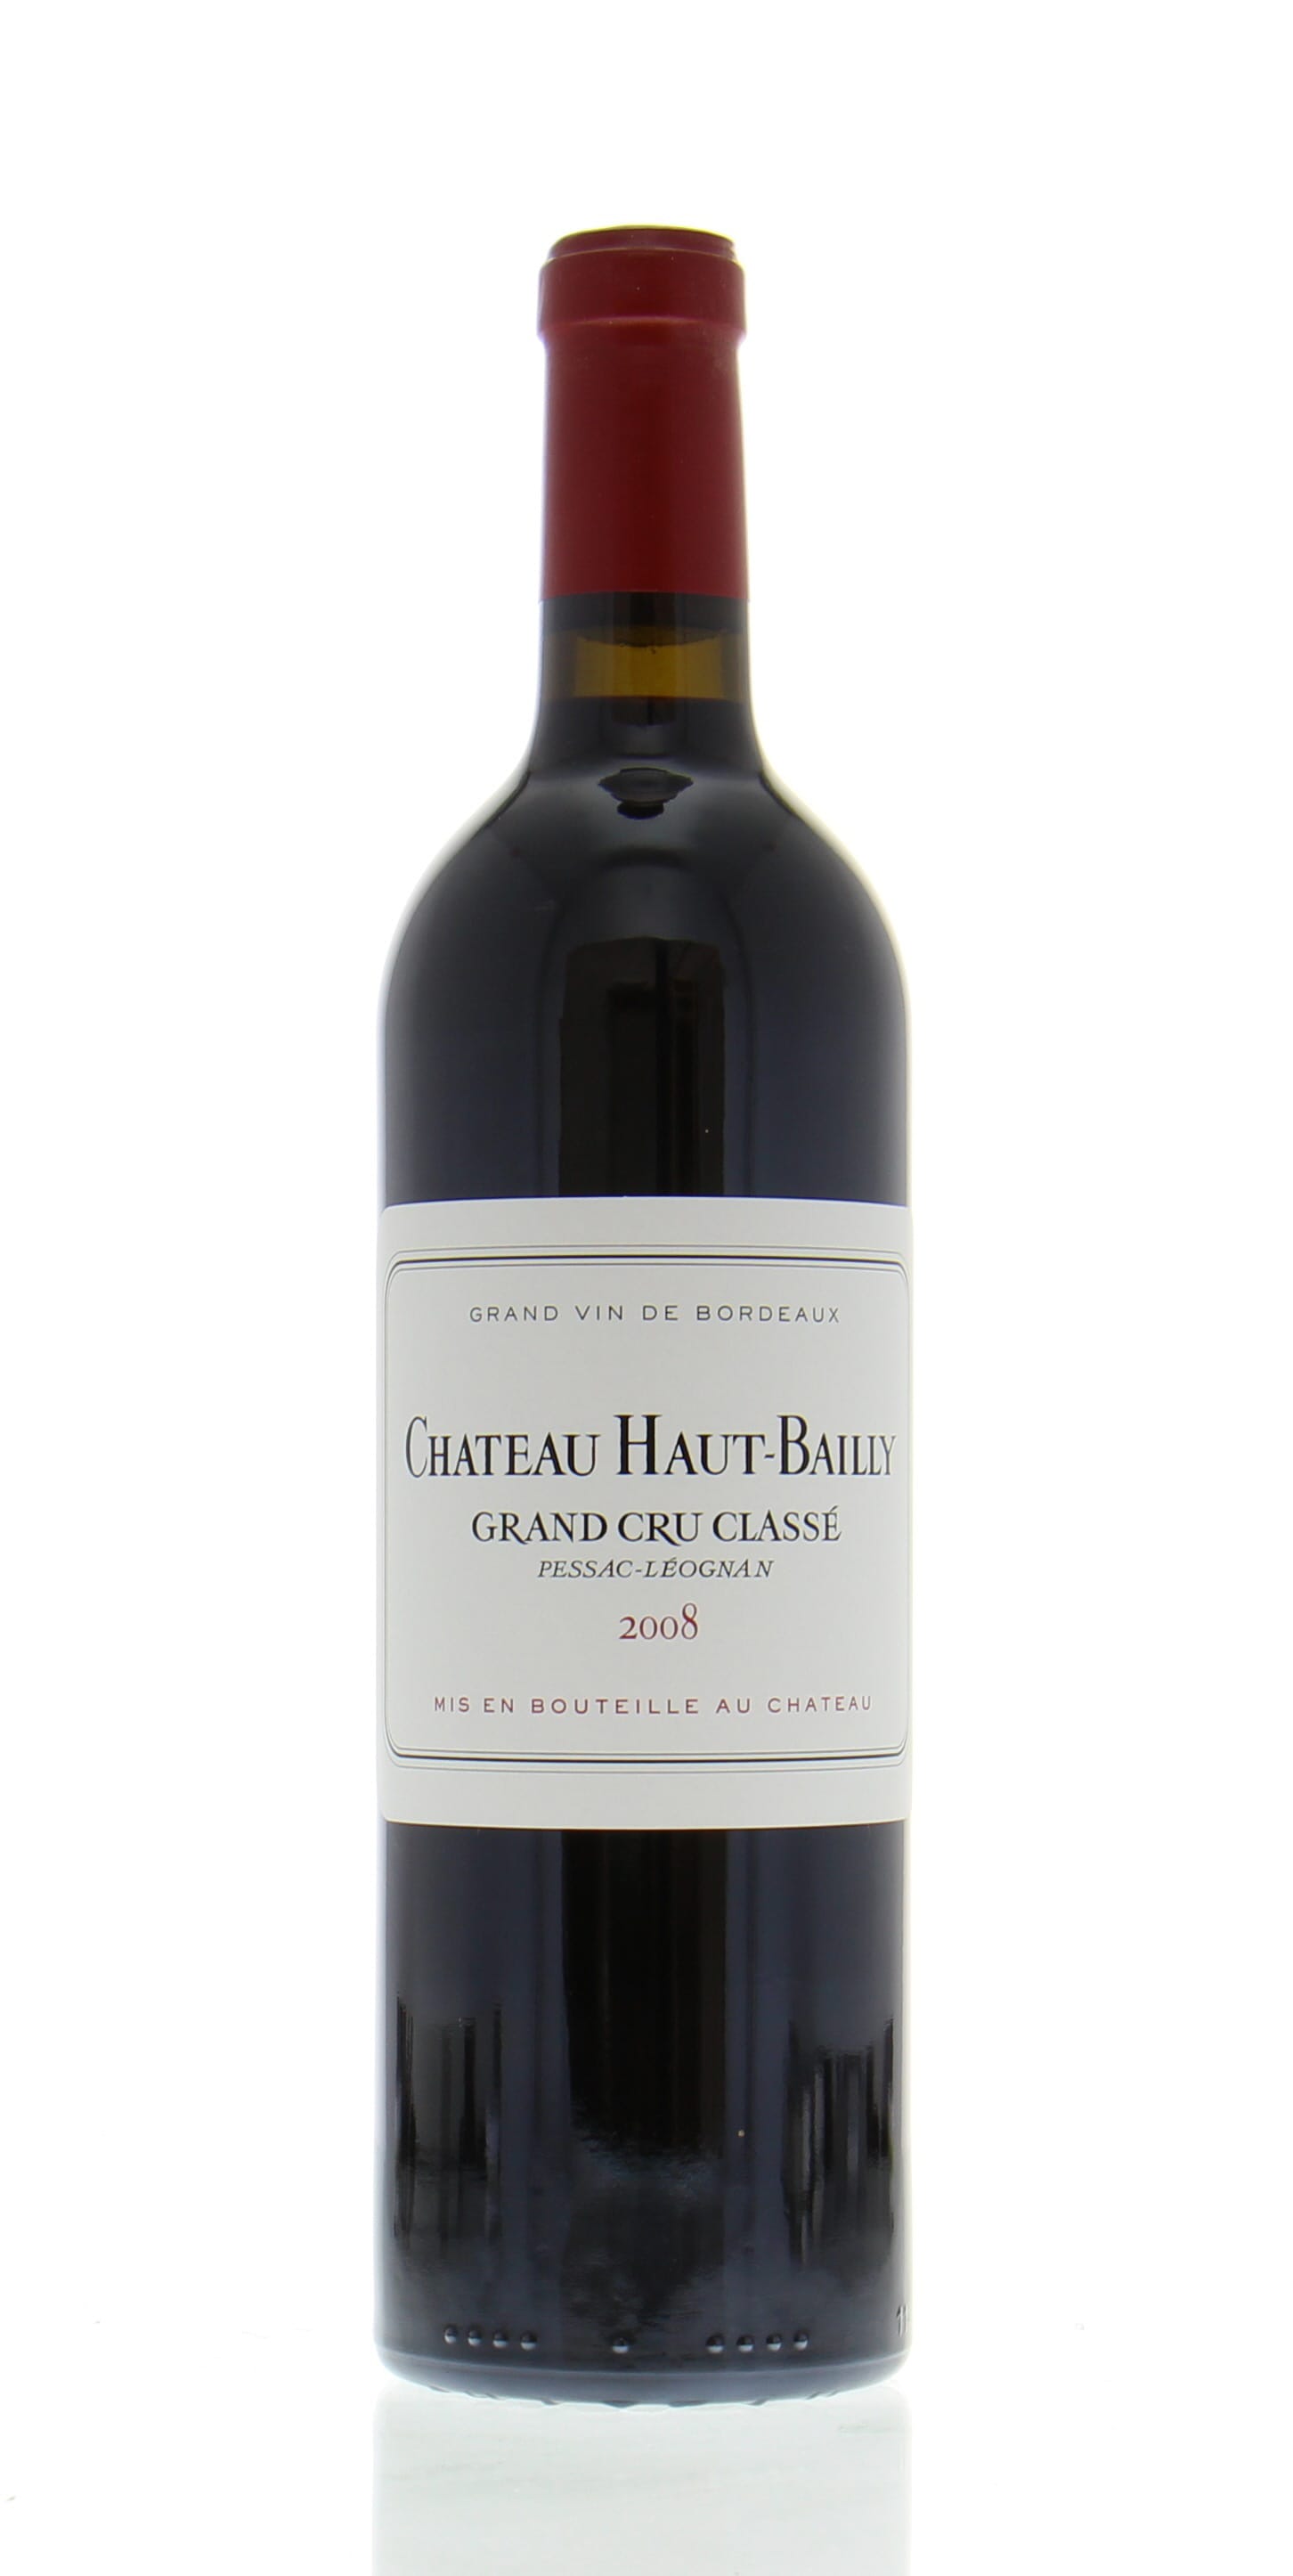 Chateau Haut Bailly - Chateau Haut Bailly 2008 Perfect